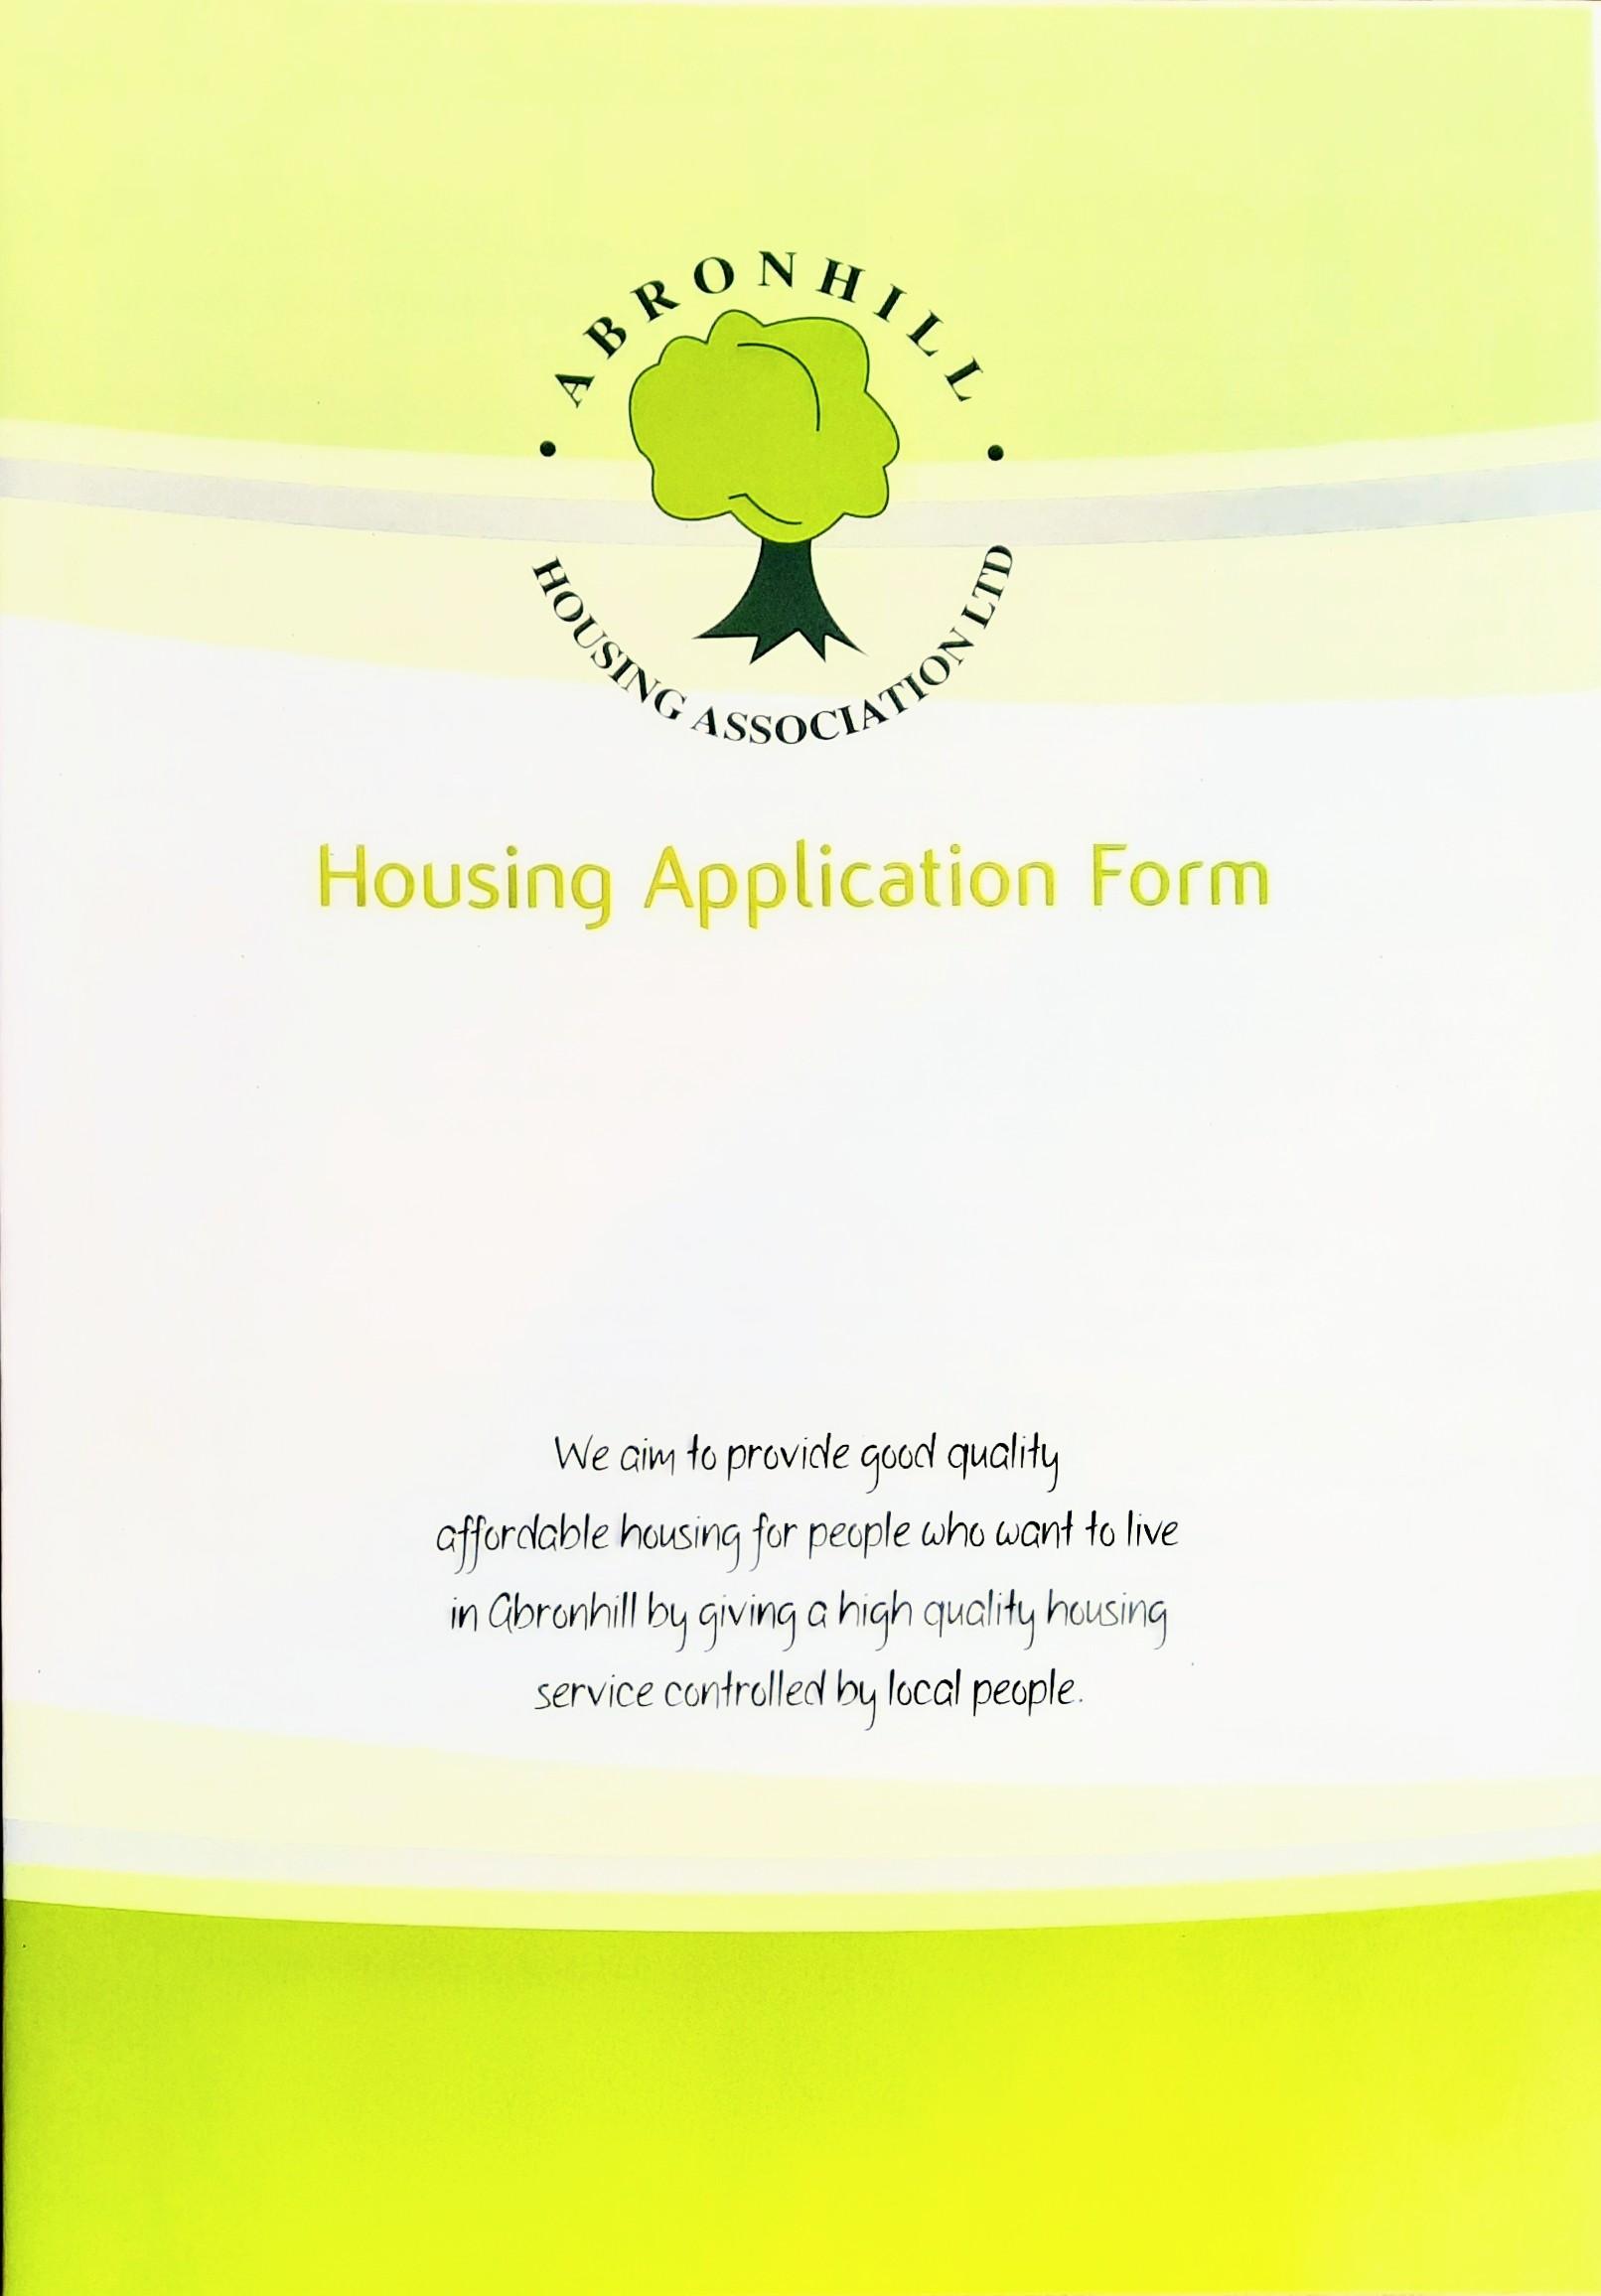 Picture of our housing application form front cover